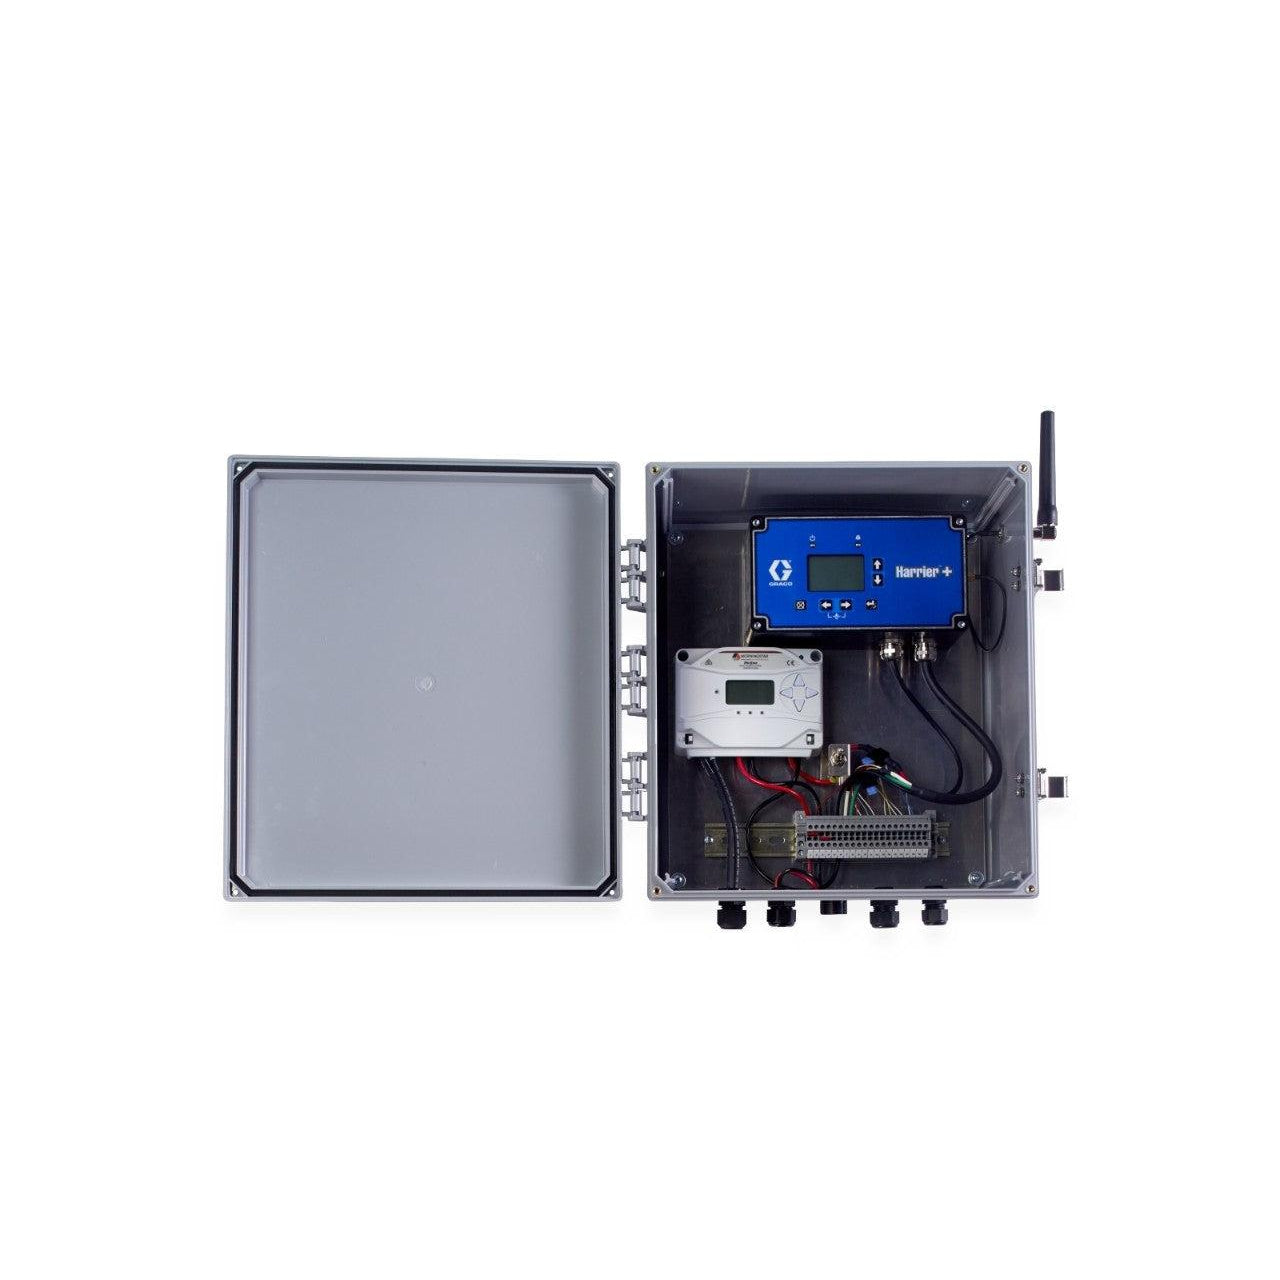 DC Control Box without Controller and Includes ASC 24/16 One Panel Charge Controller, NEMA Rated